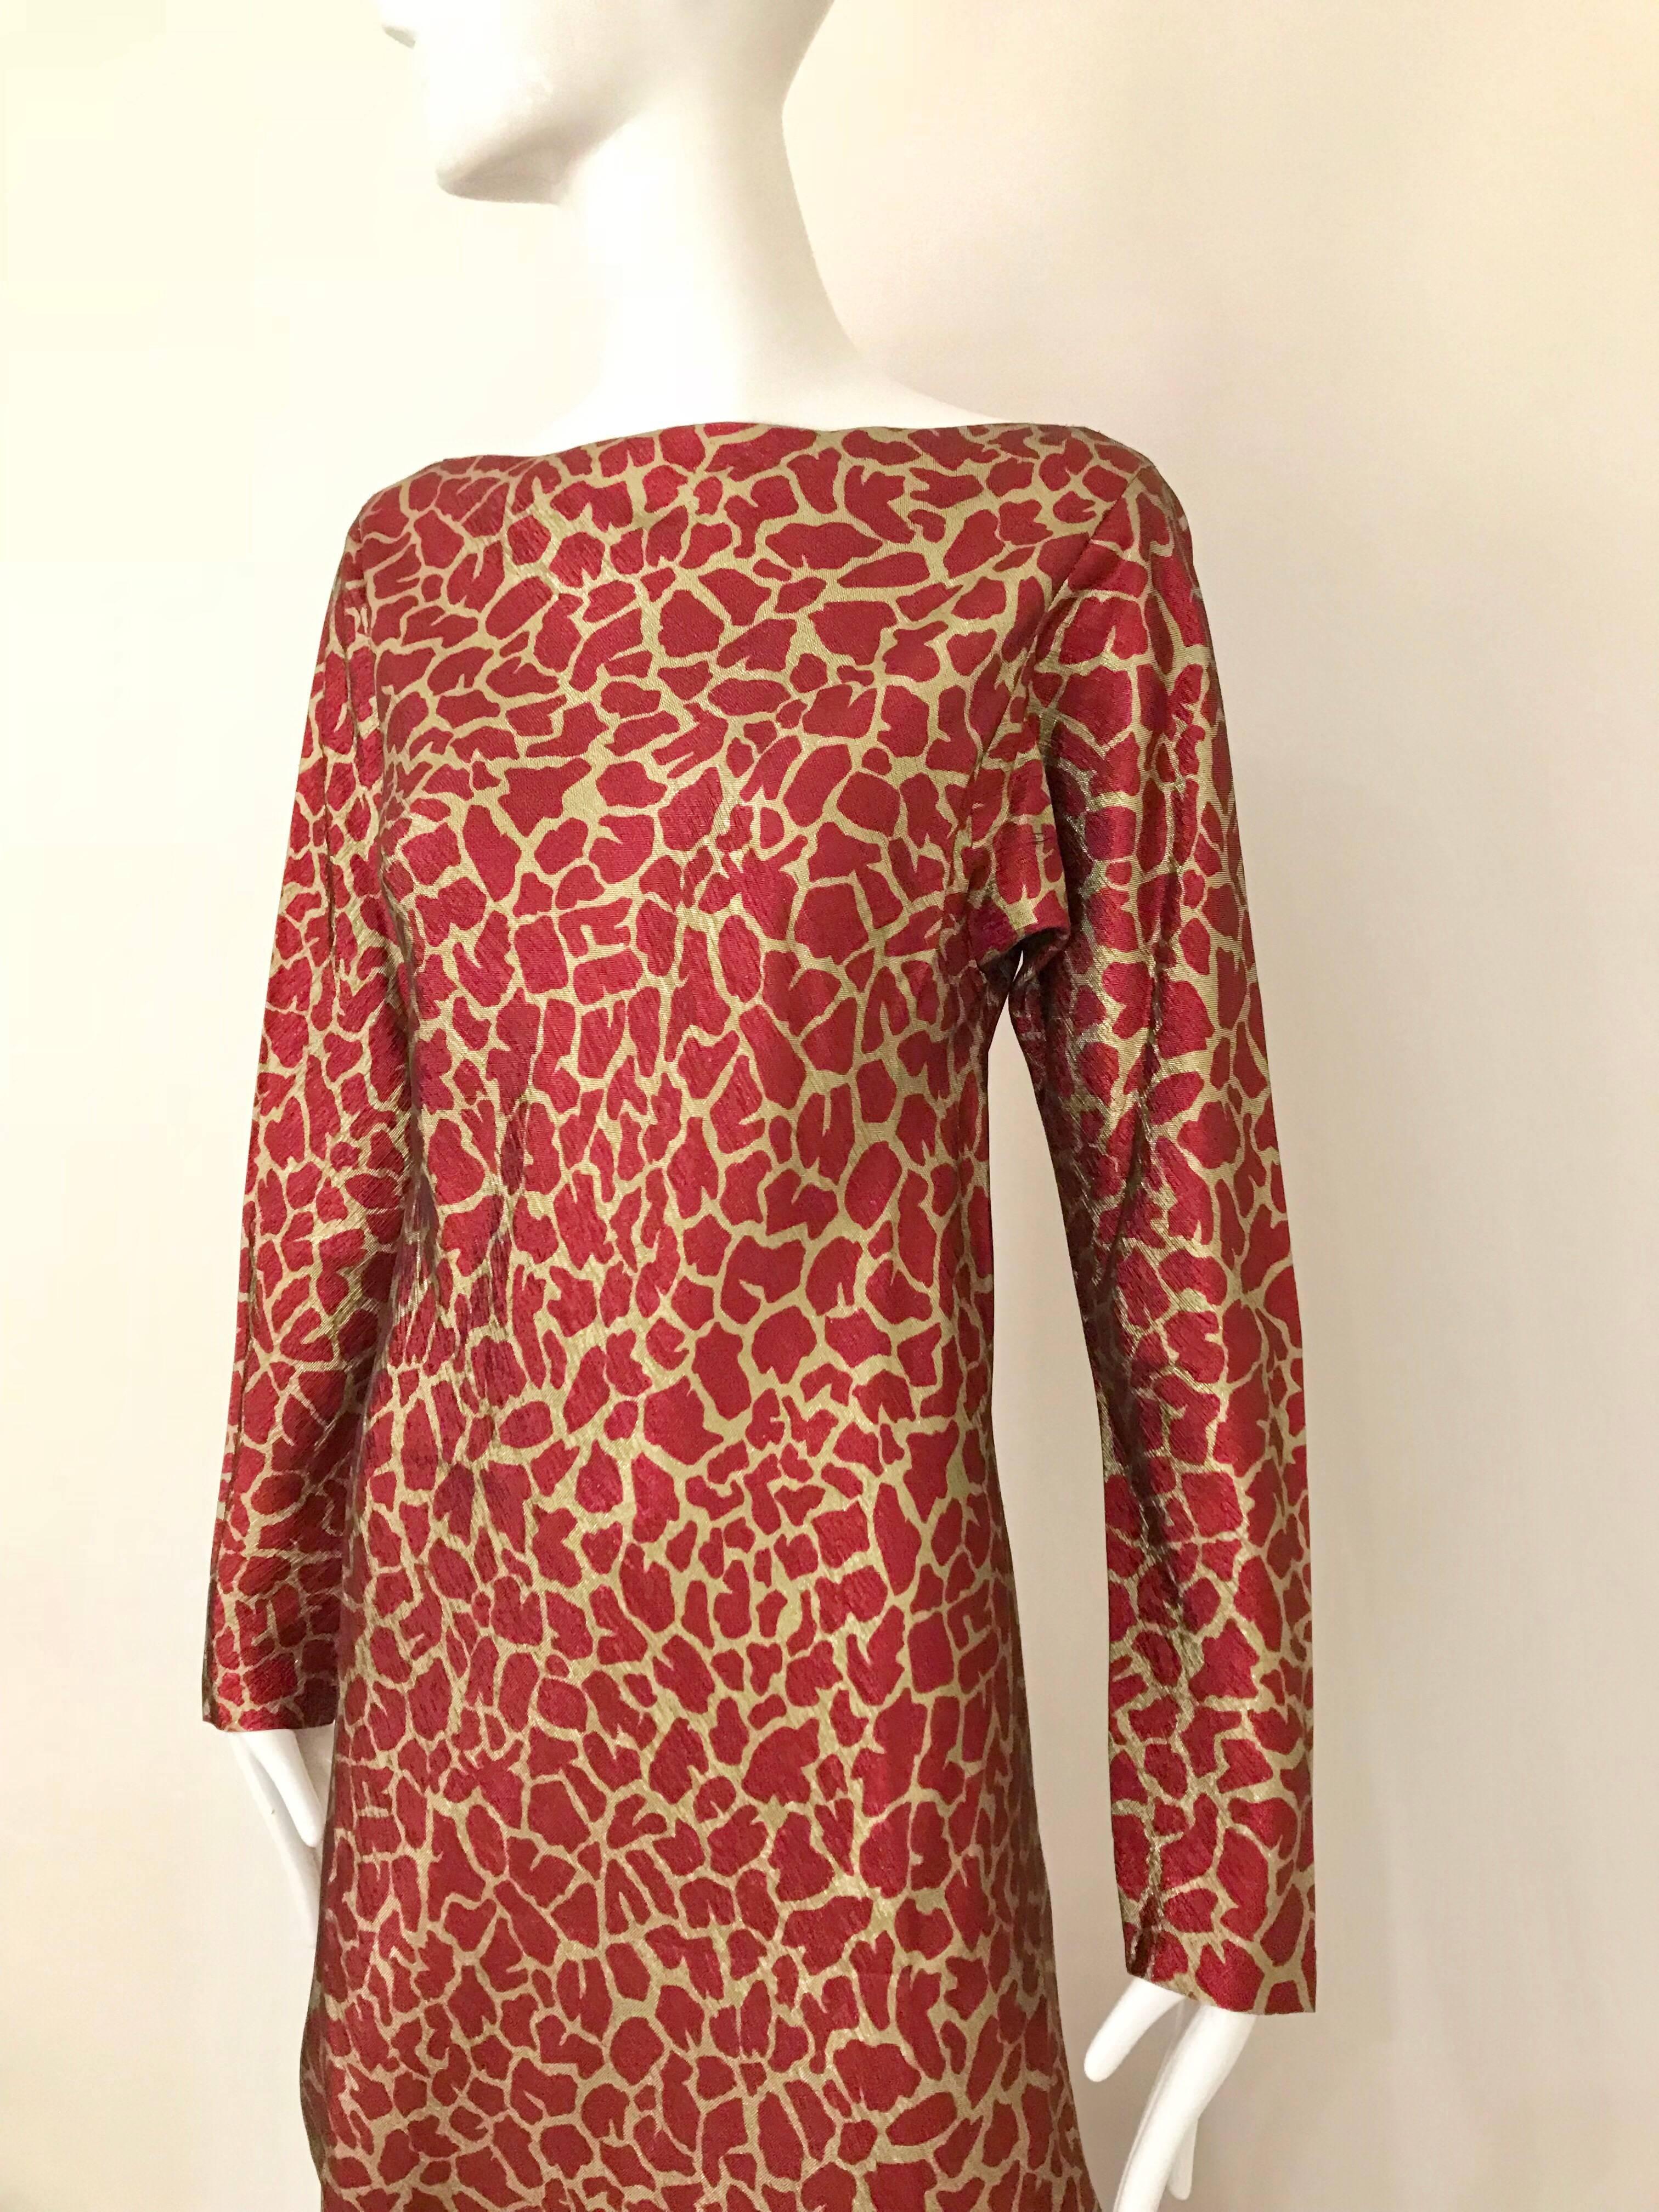 1970s Classic HALSTON Bias Cut red and gold metallic animal  print long sleeve long dress. Slip on Dress. 
Size: 6 - 8  Medium
Bust: 36 inches/ Waist: 39 Hip: 40 inch
**** This Garment has been professionally Dry Cleaned and Ready to wear.

